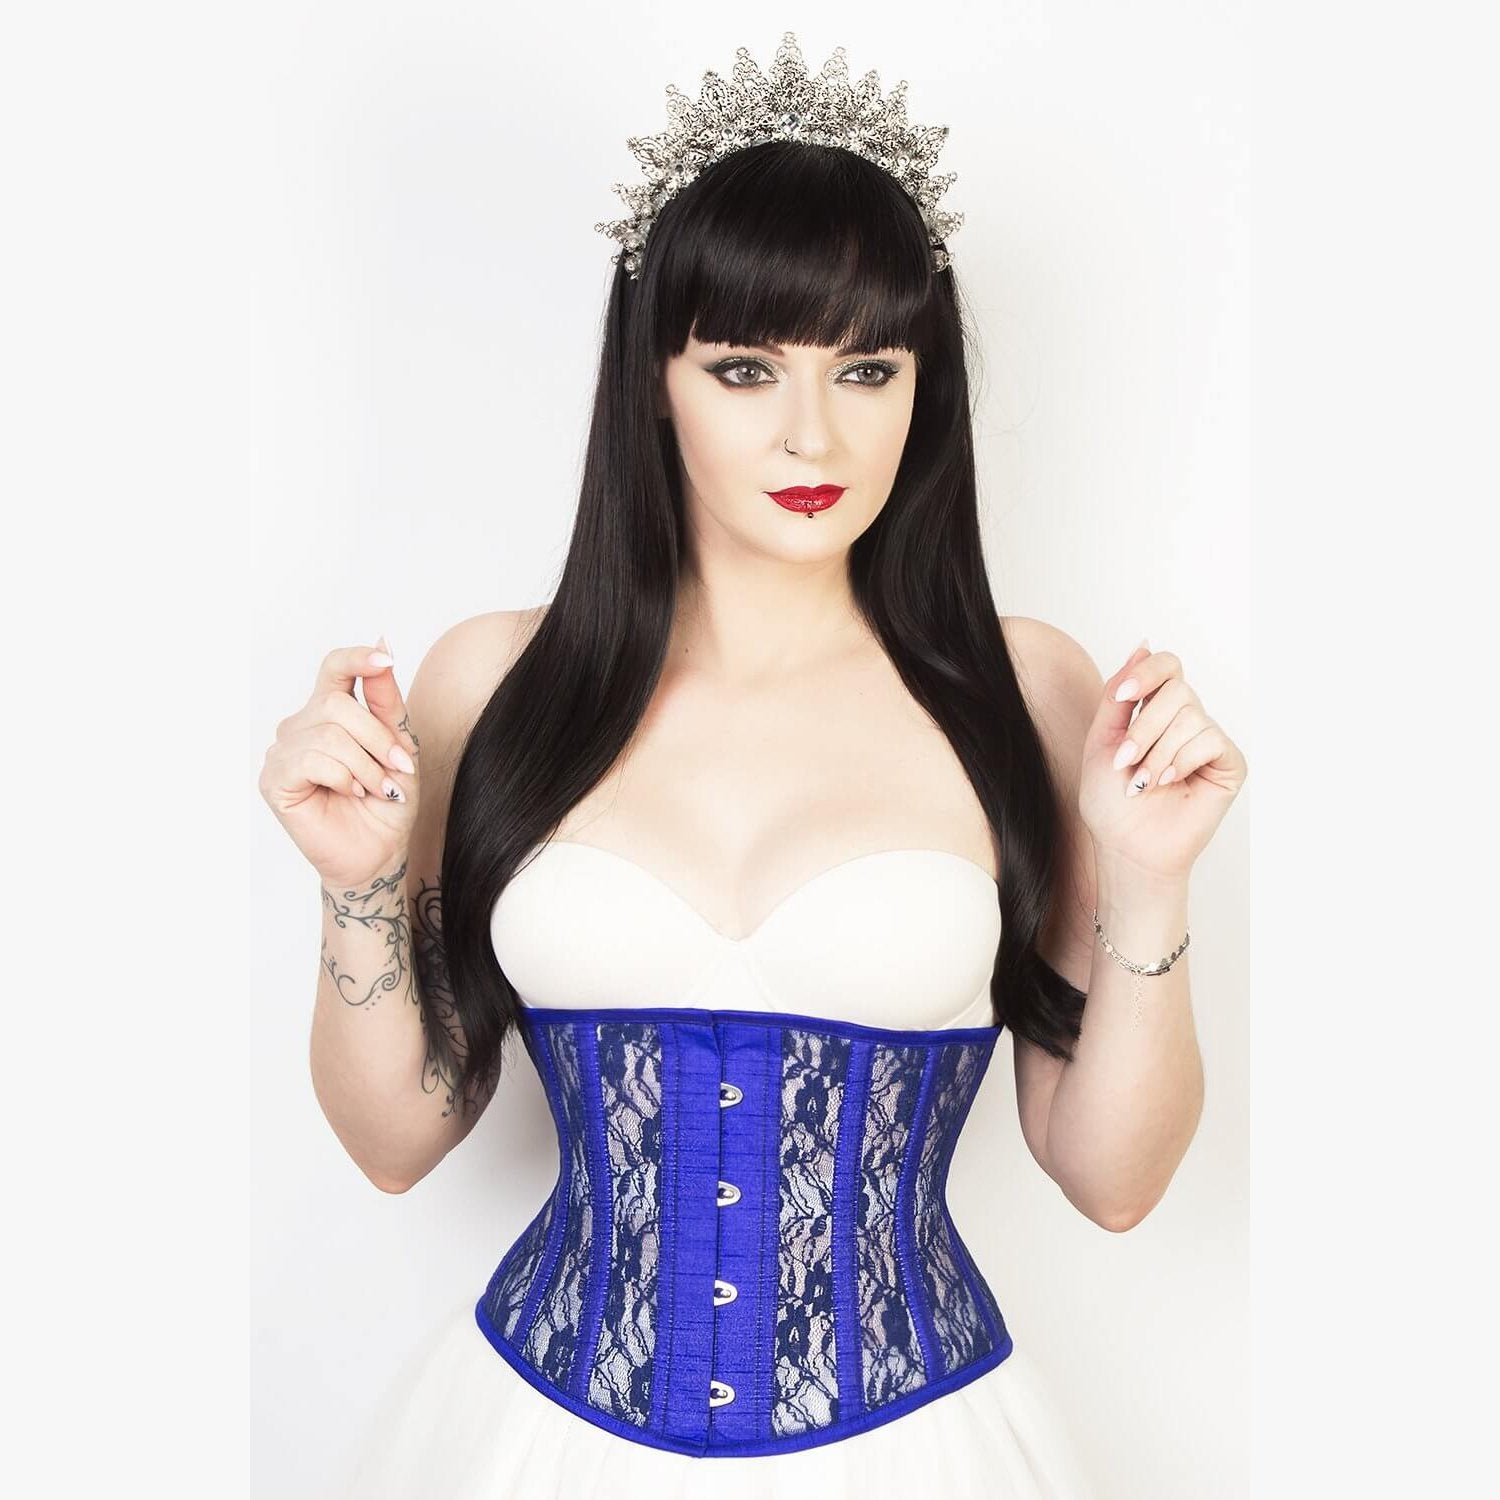 How To Style an Underbust Corset